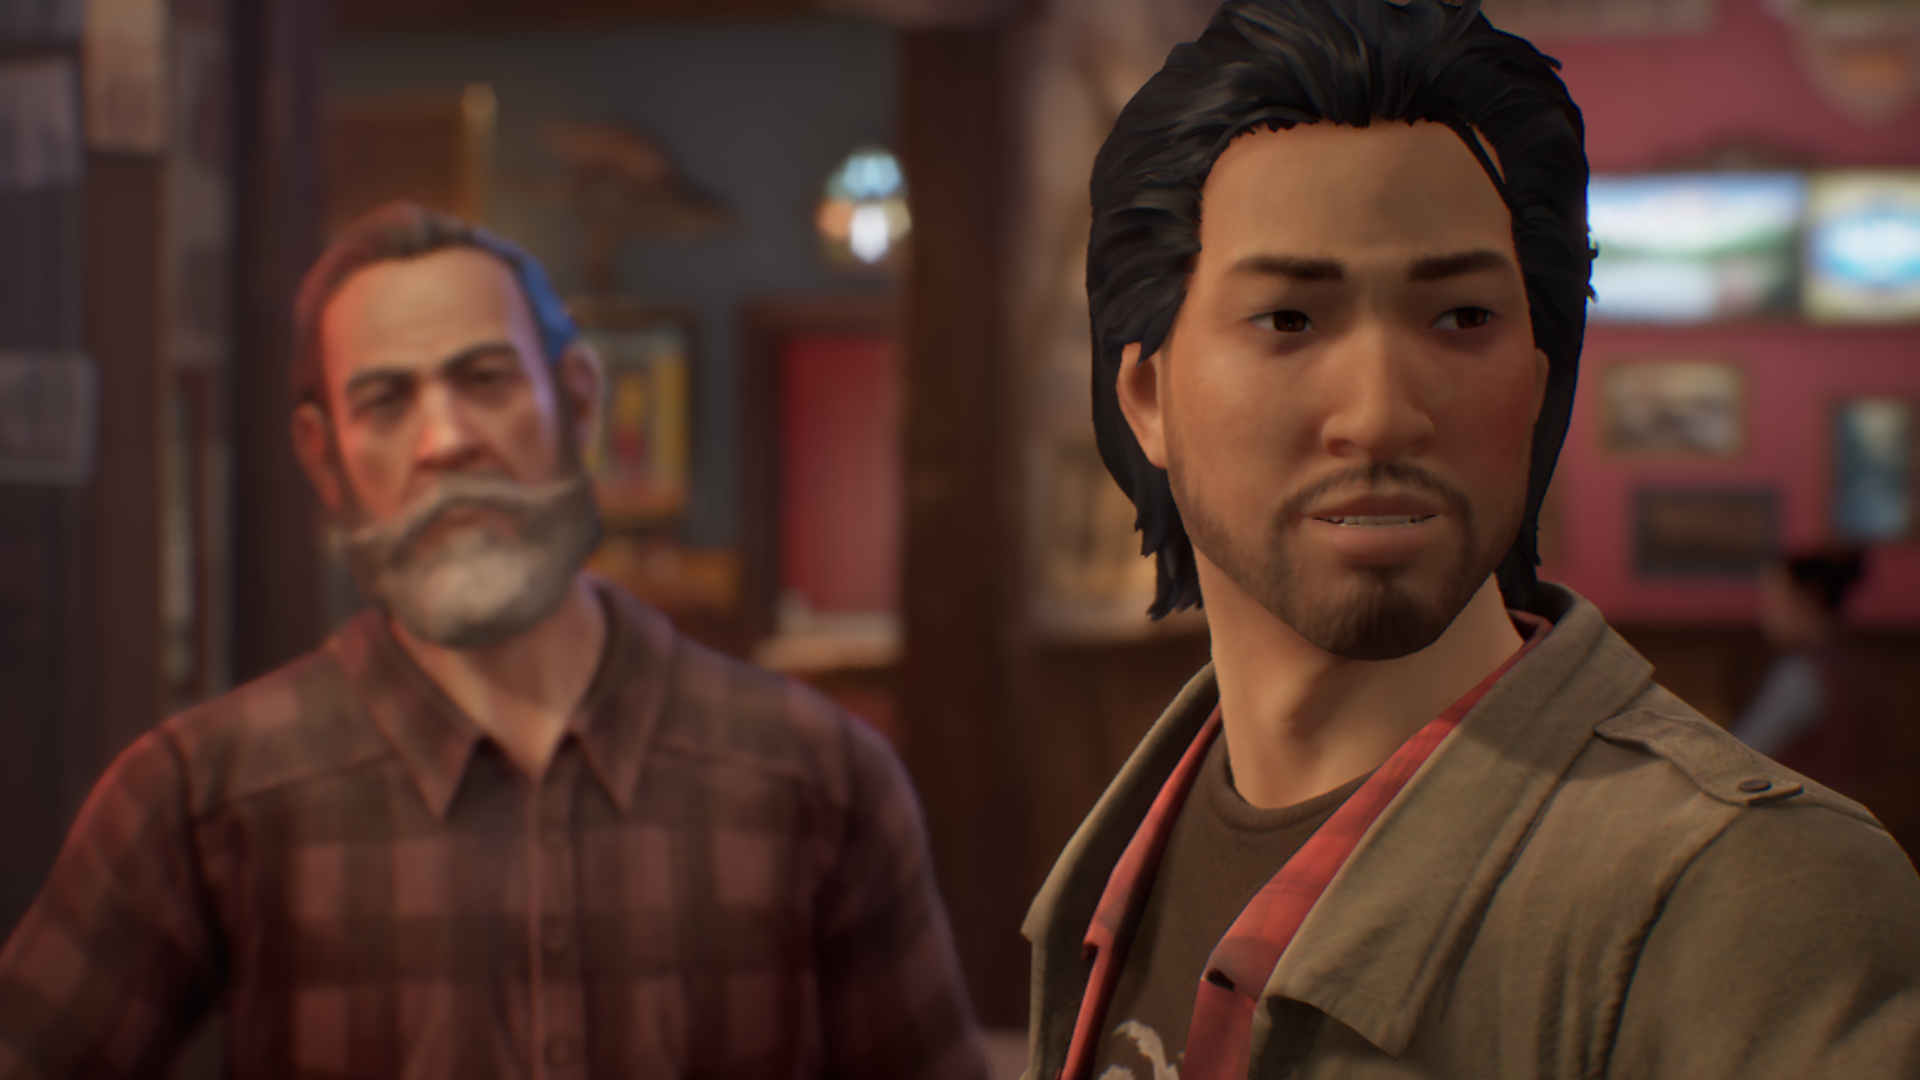 The Main Voice Cast In Life Is Strange: True Colors